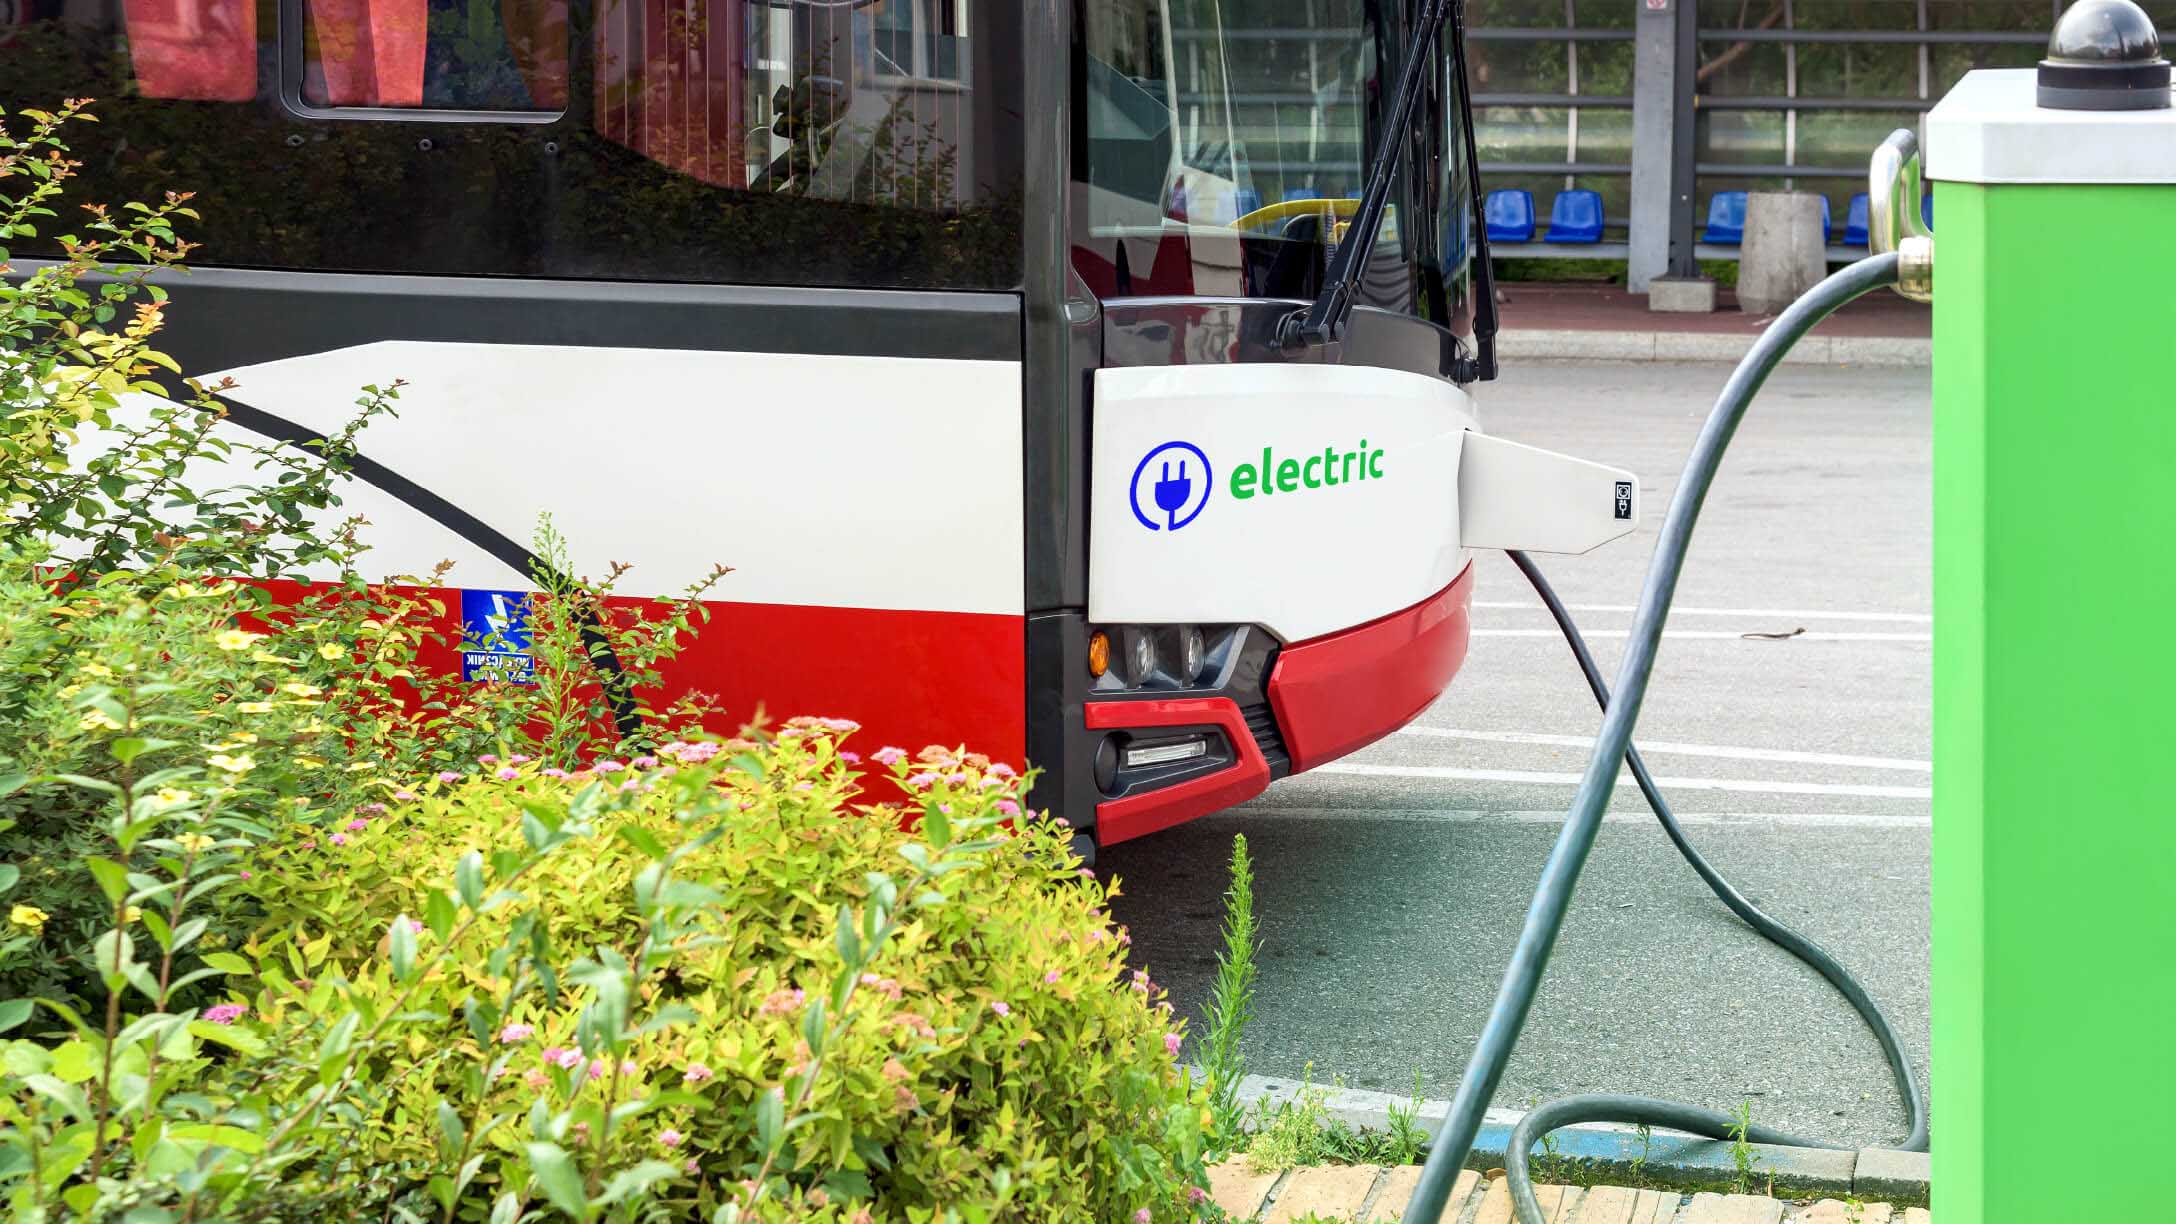 Electric bus being charged at a charging station